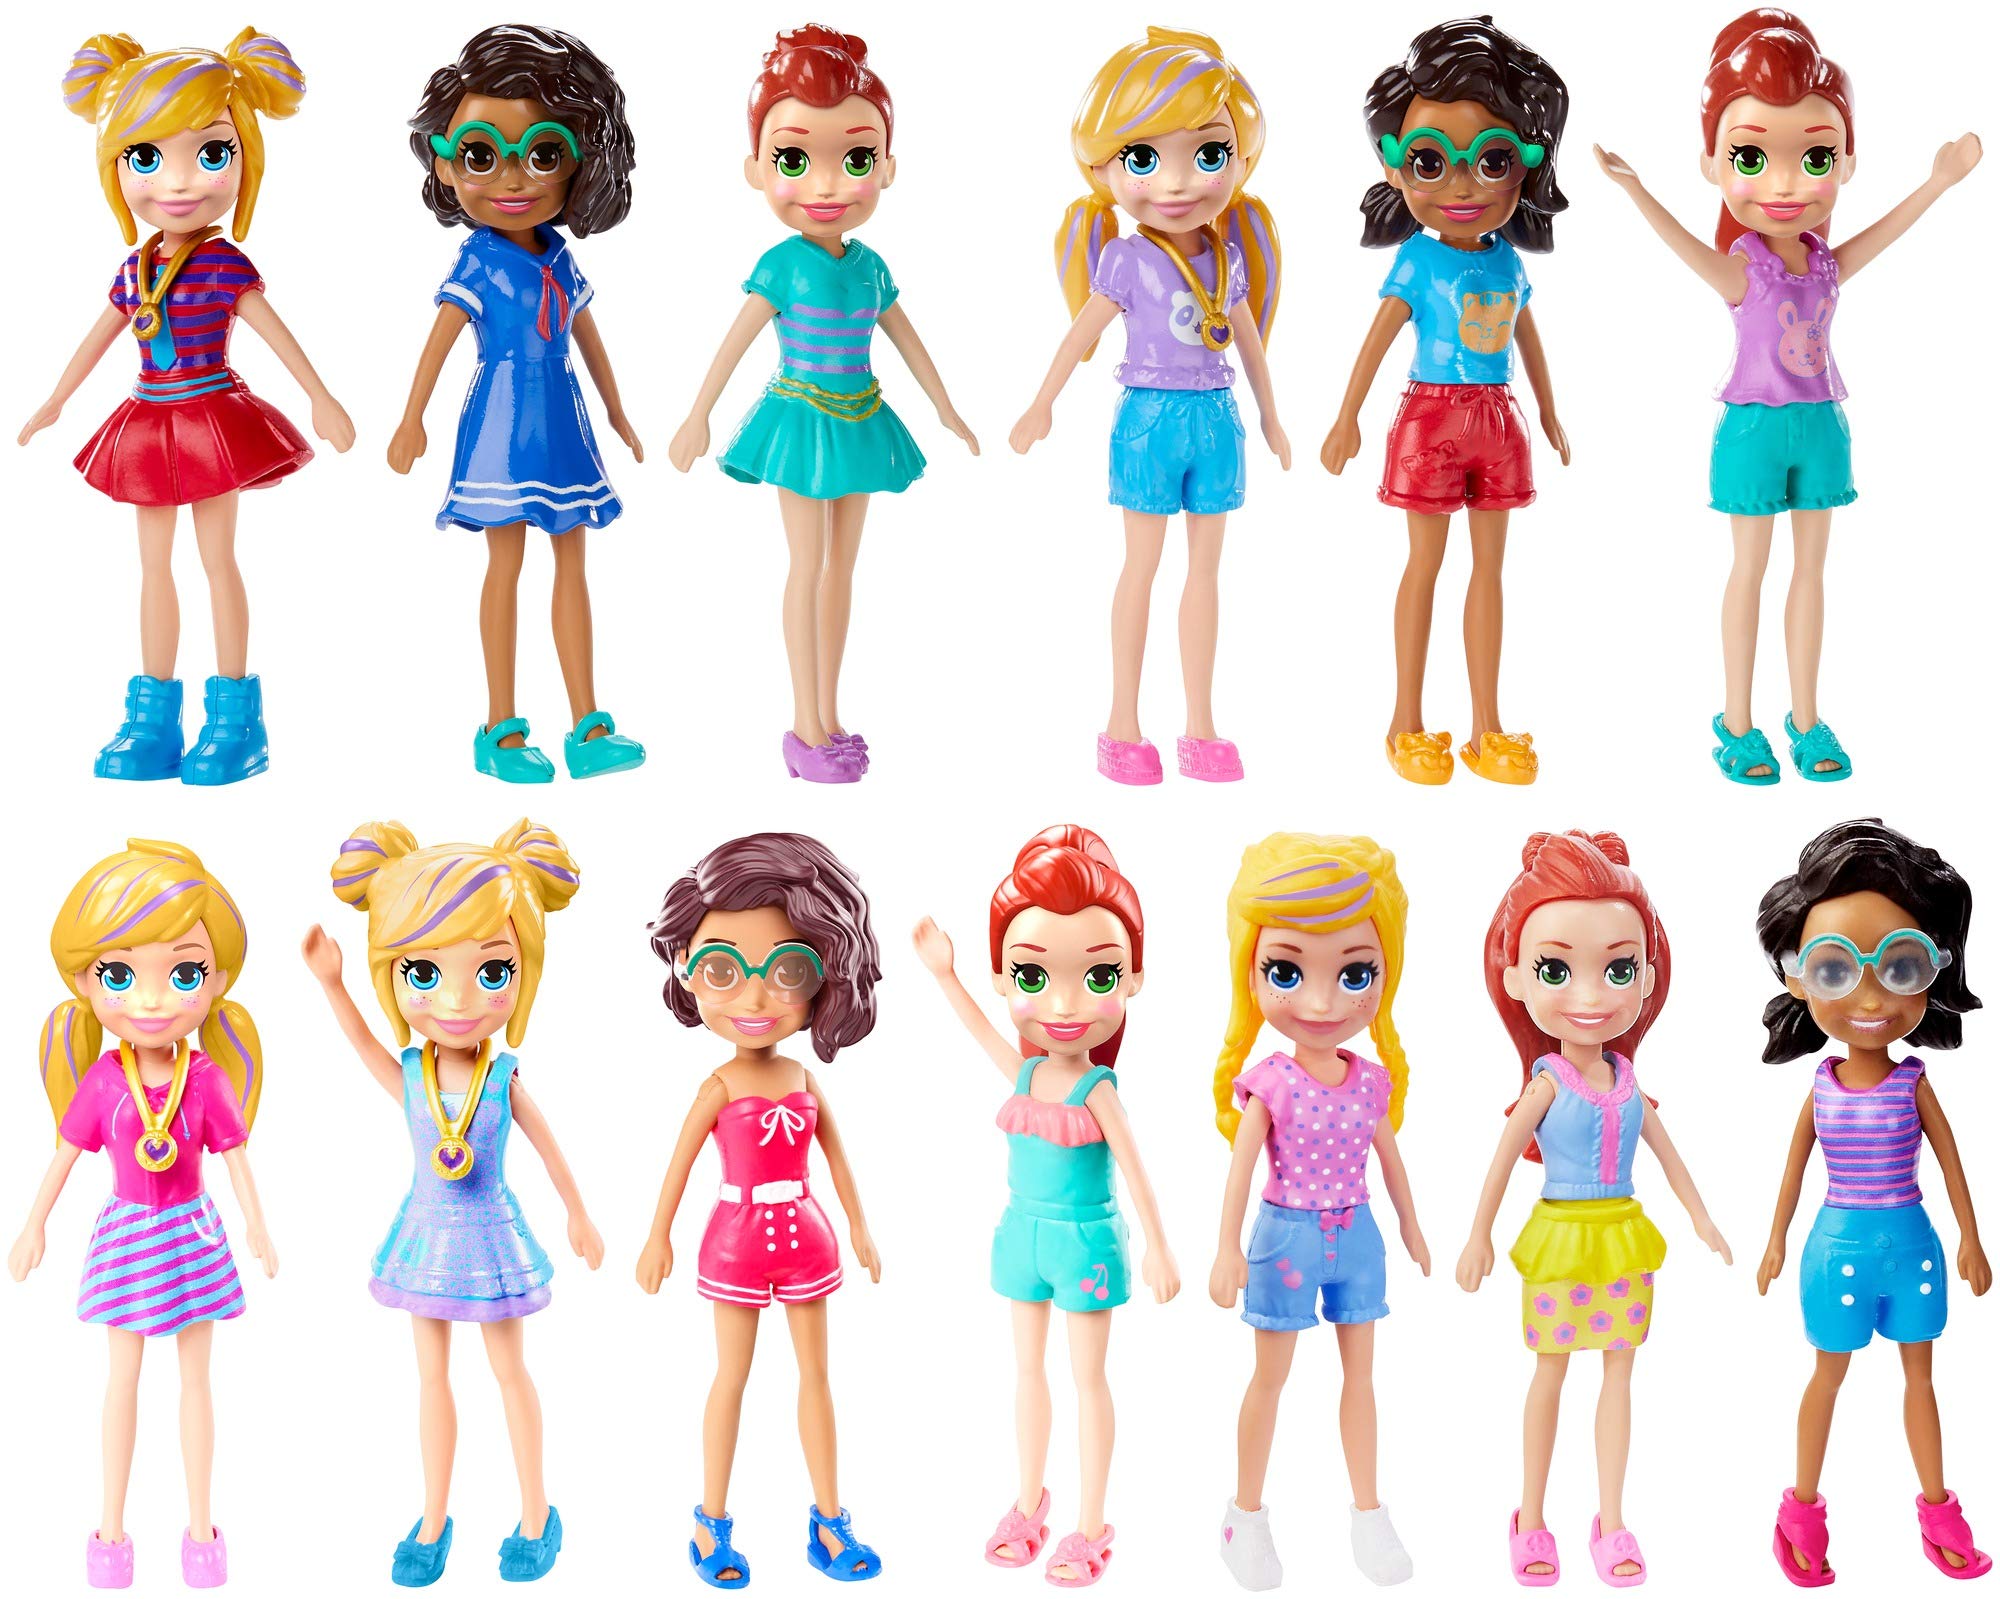 New Polly Pocket LiveAction Film Coming From Writer/Director Lena